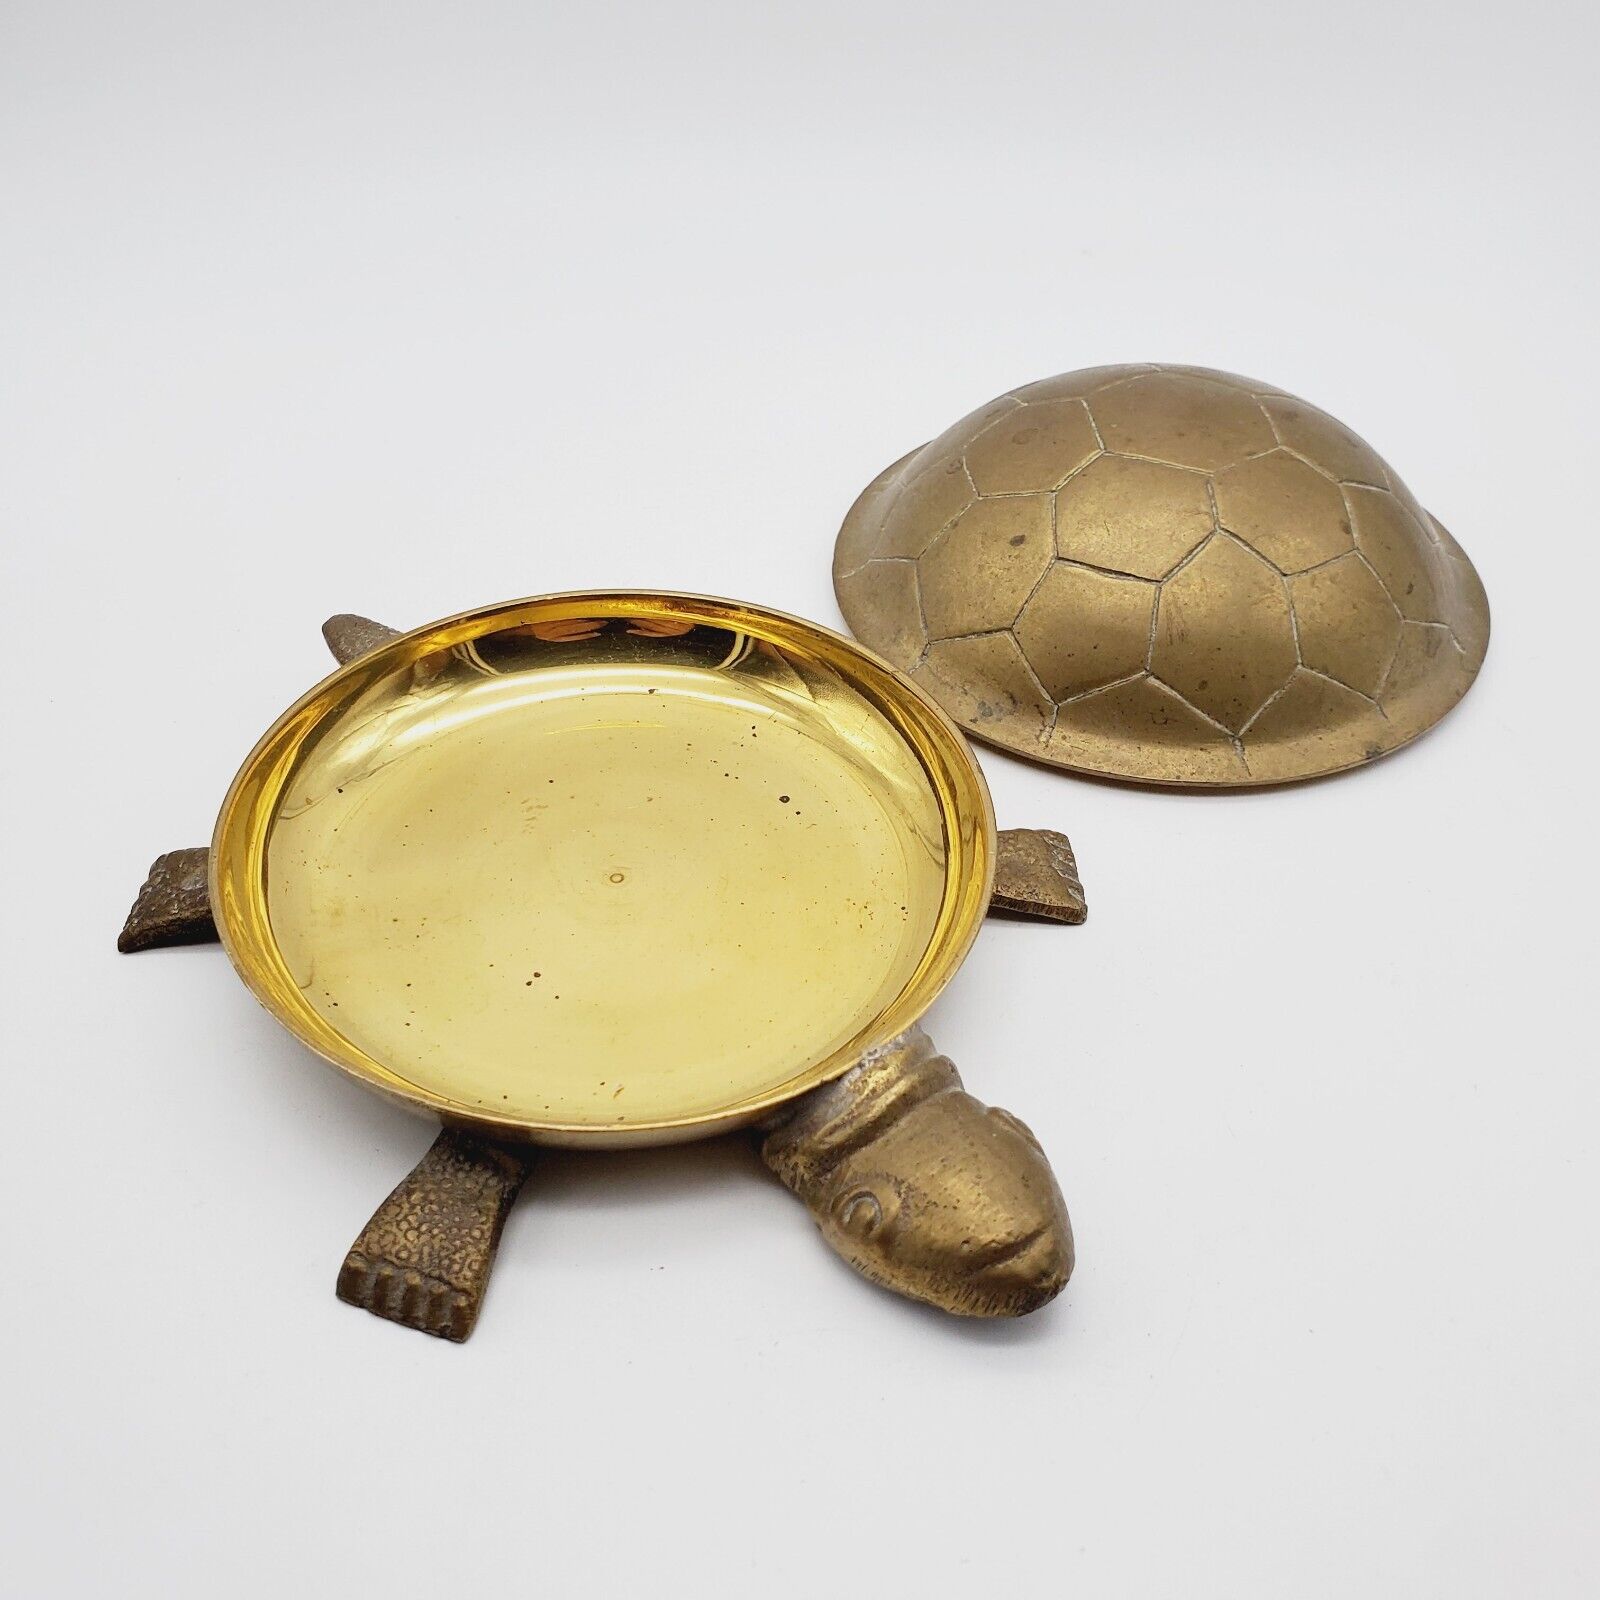 Brass Vintage Turtle Dish Trinket Holder Jewelry Made in India